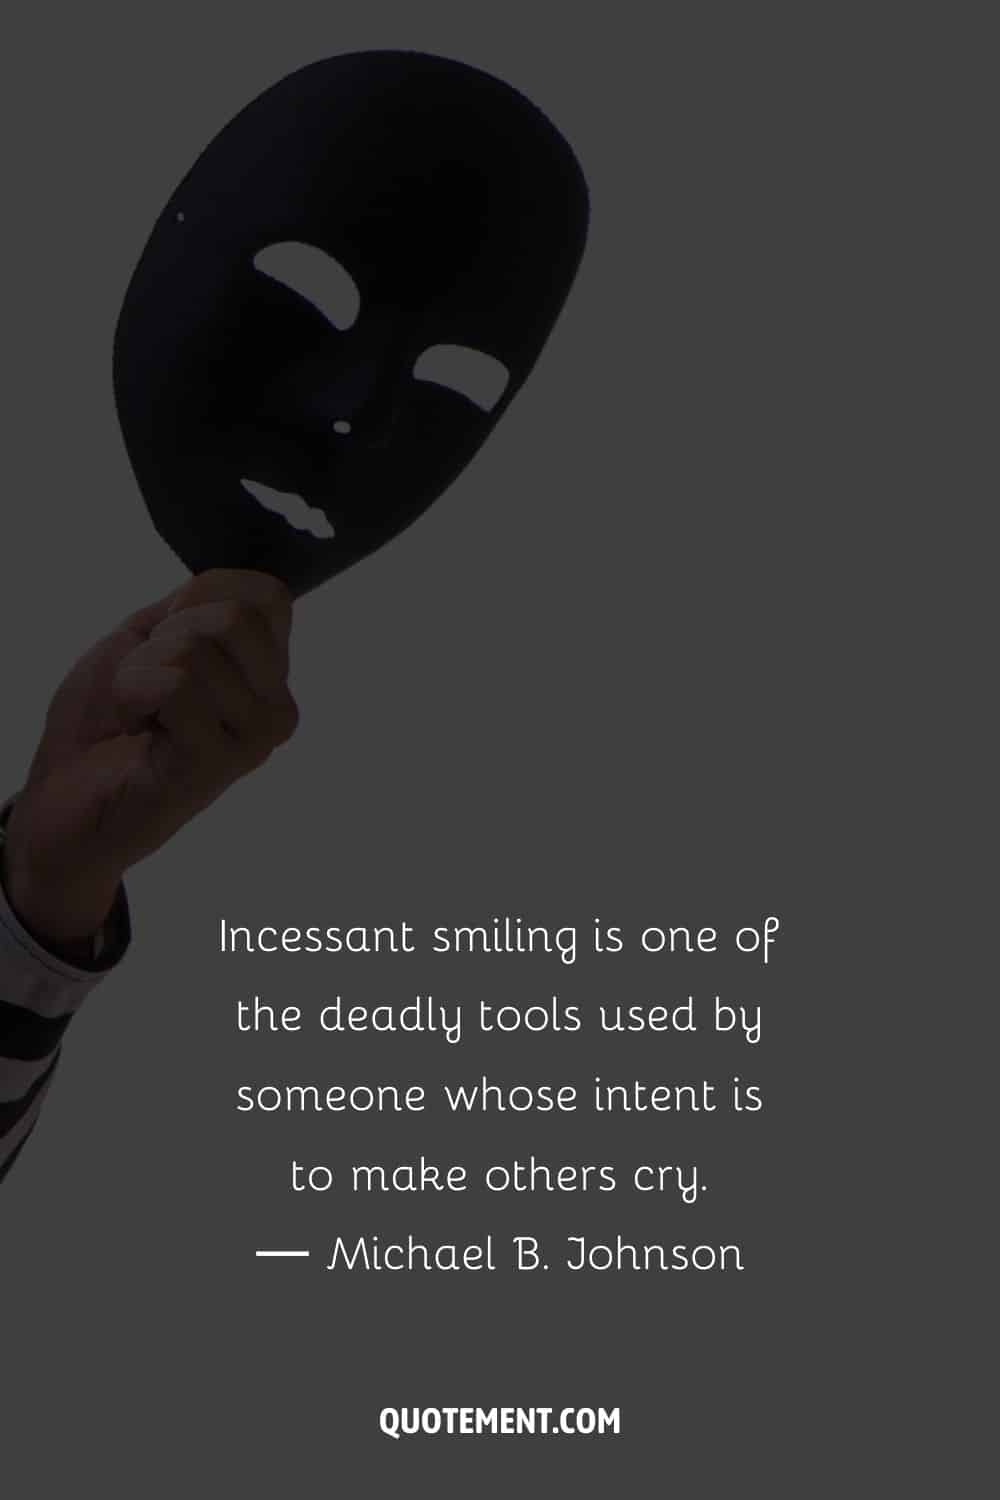 black mask in a hand image representing a deep fake quote